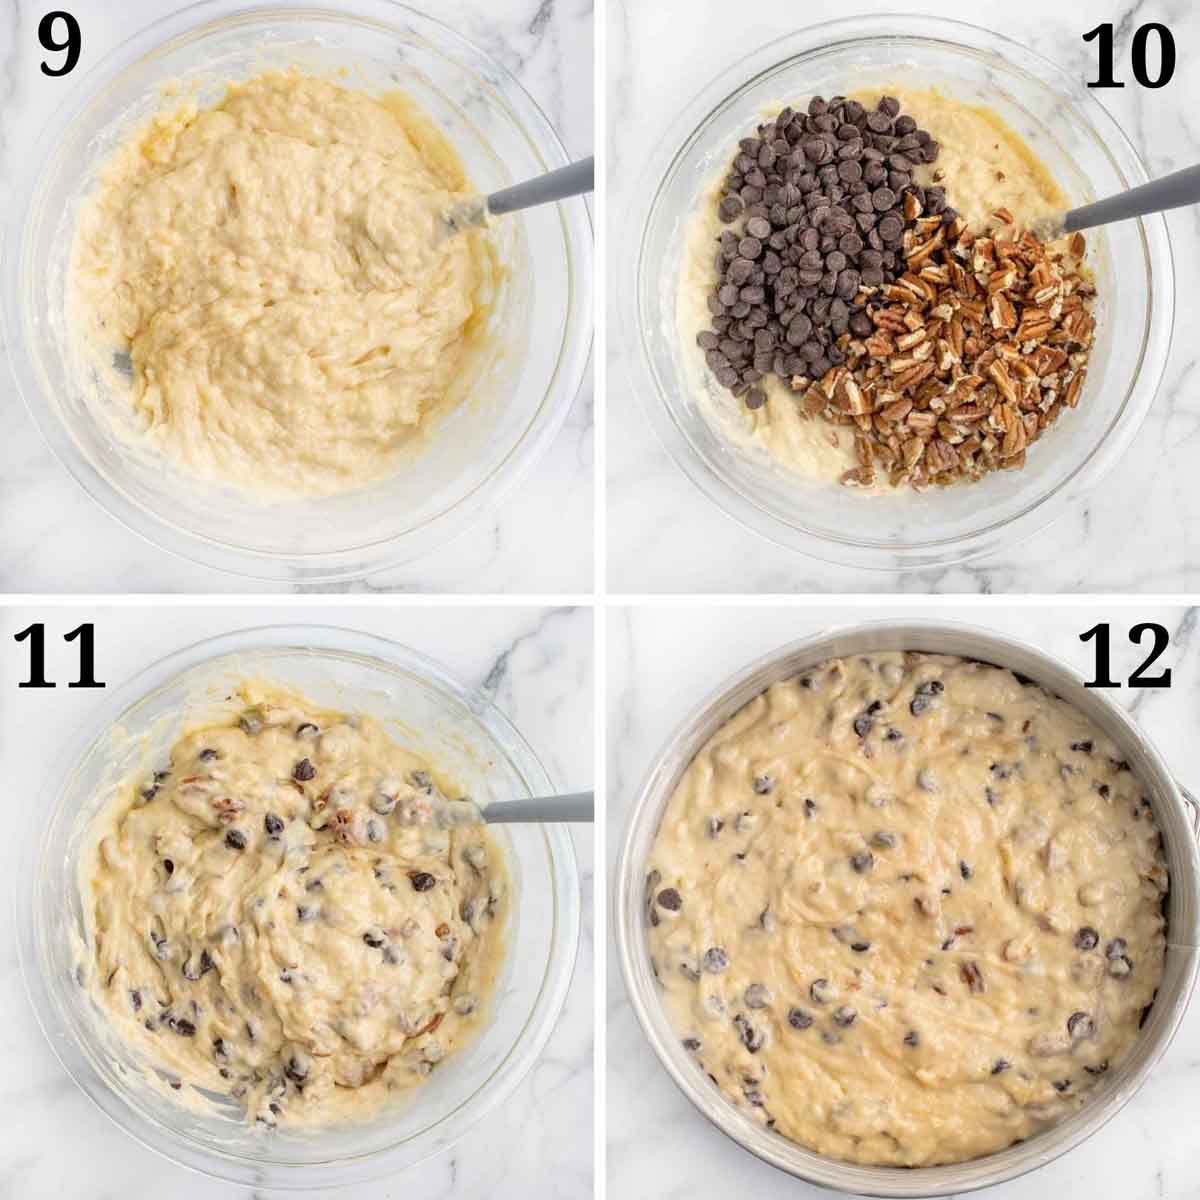 final four images showing to make the banana cake batter